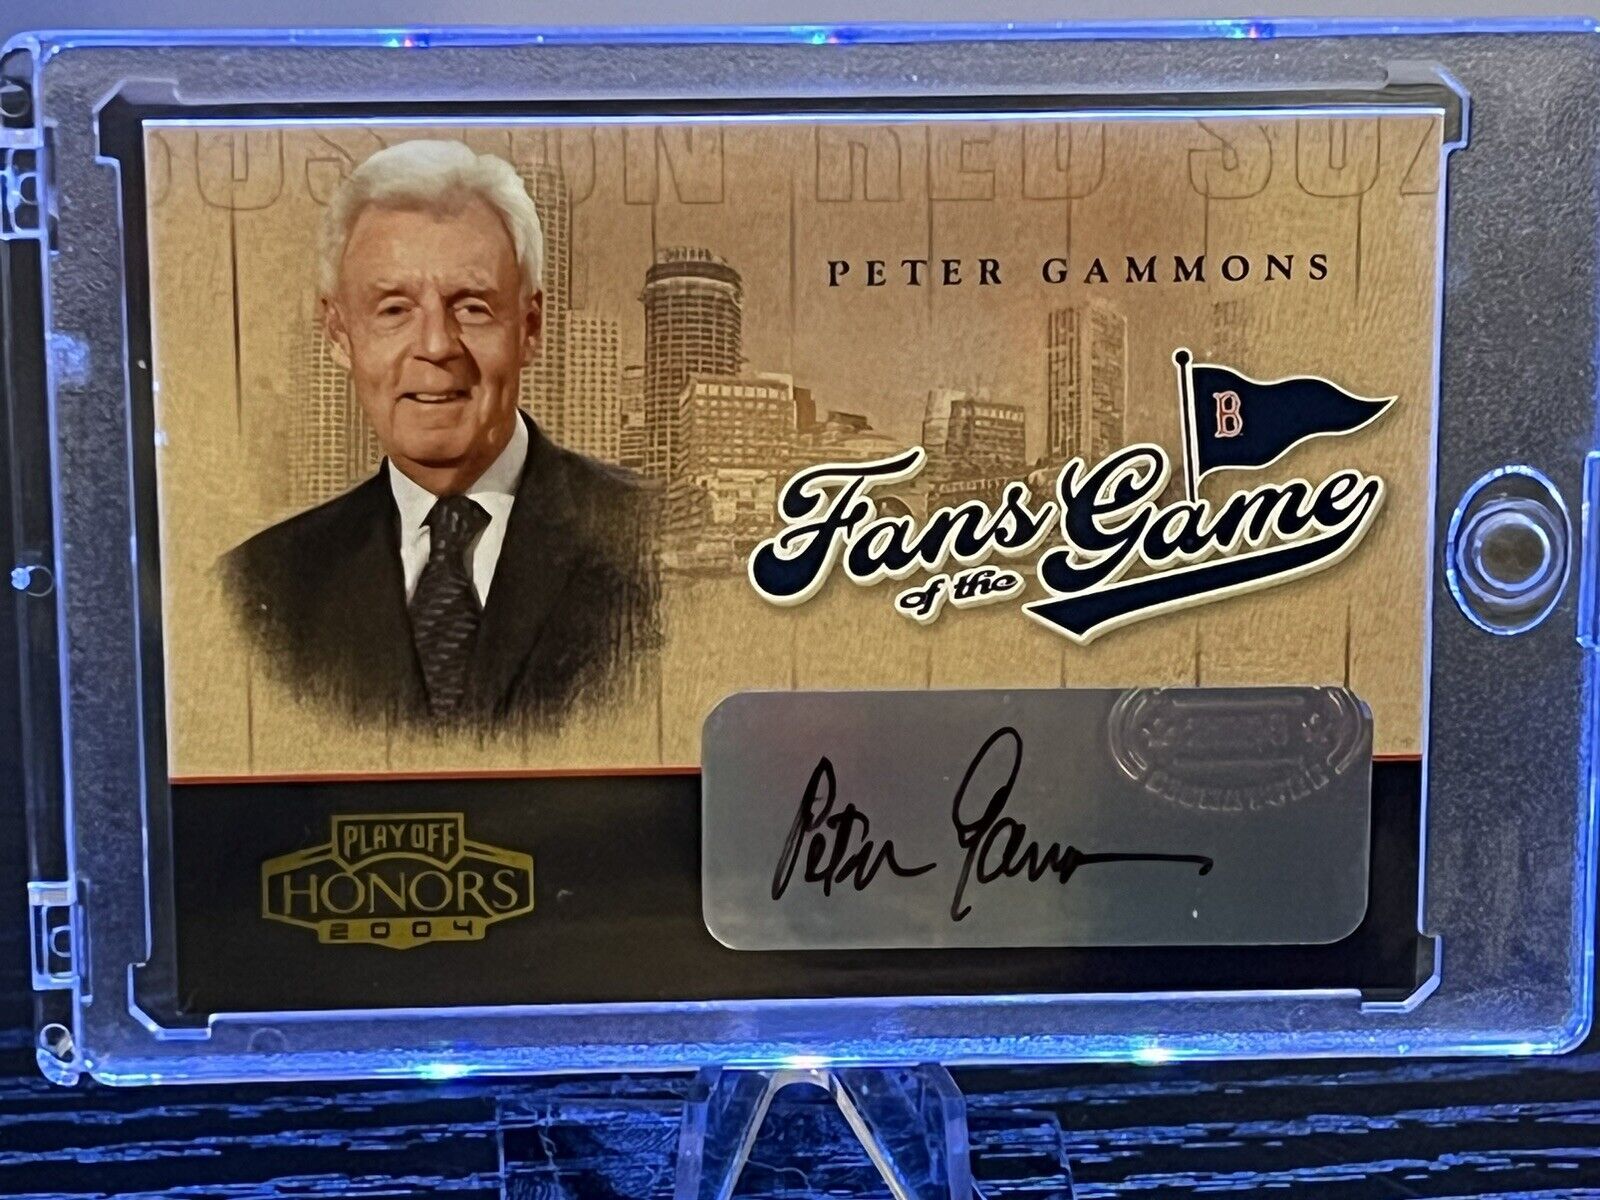 2004 RED SOX THROWBACK THREADS FANS OF THE GAME PETER GAMMONS AUTOGRAPH 